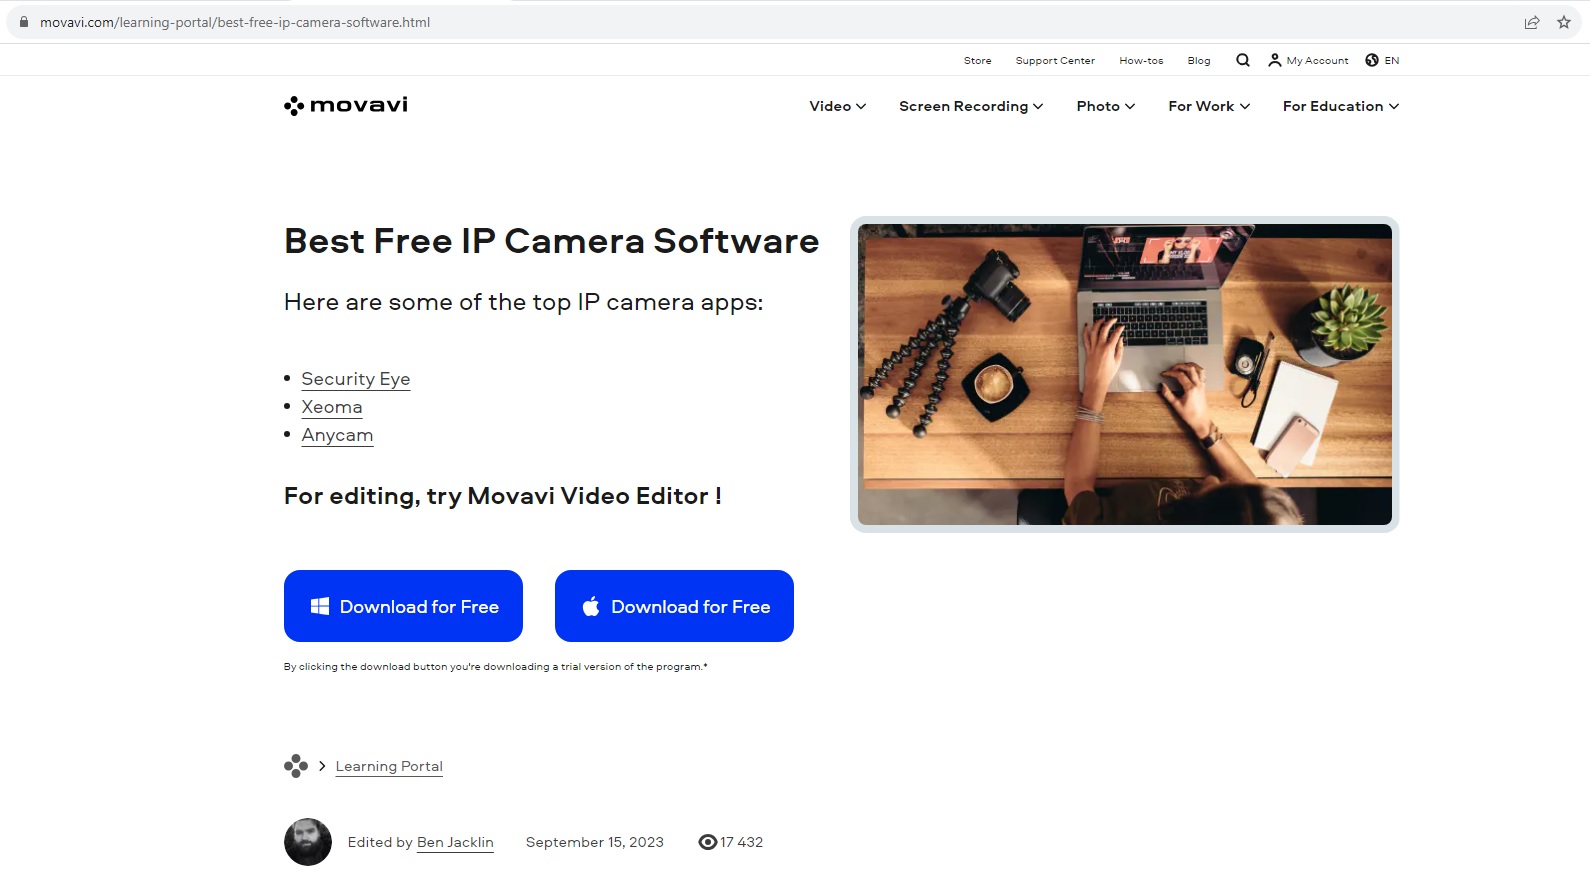 Xeoma marked as the best free IP camera software by movavi.com